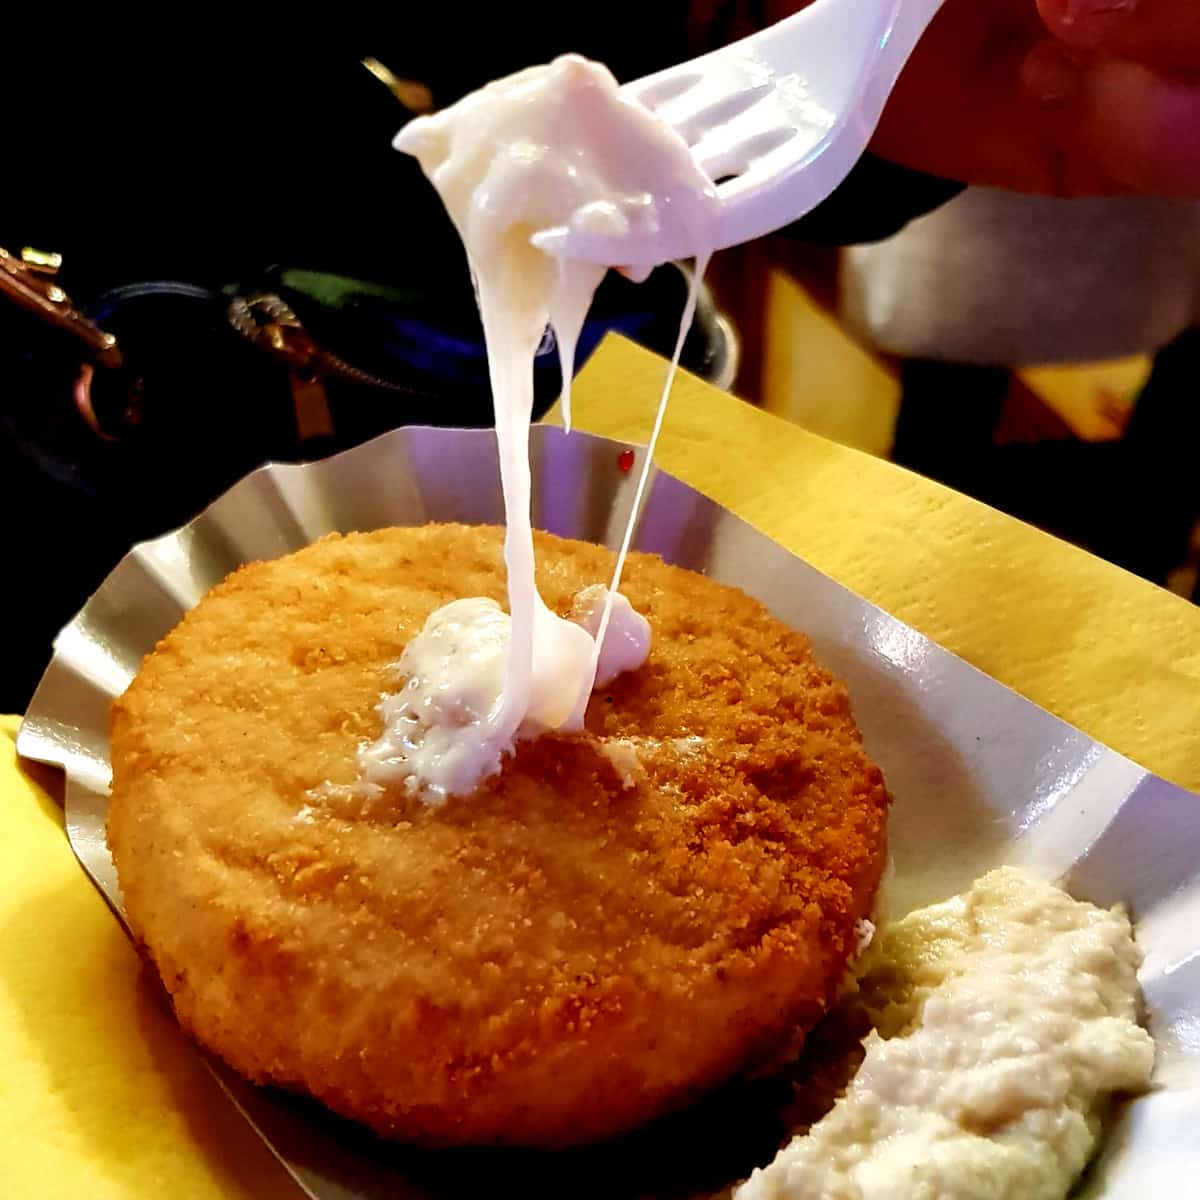 Breaded Camembert at a German Christmas Market. A Fork has dipped into the cheese